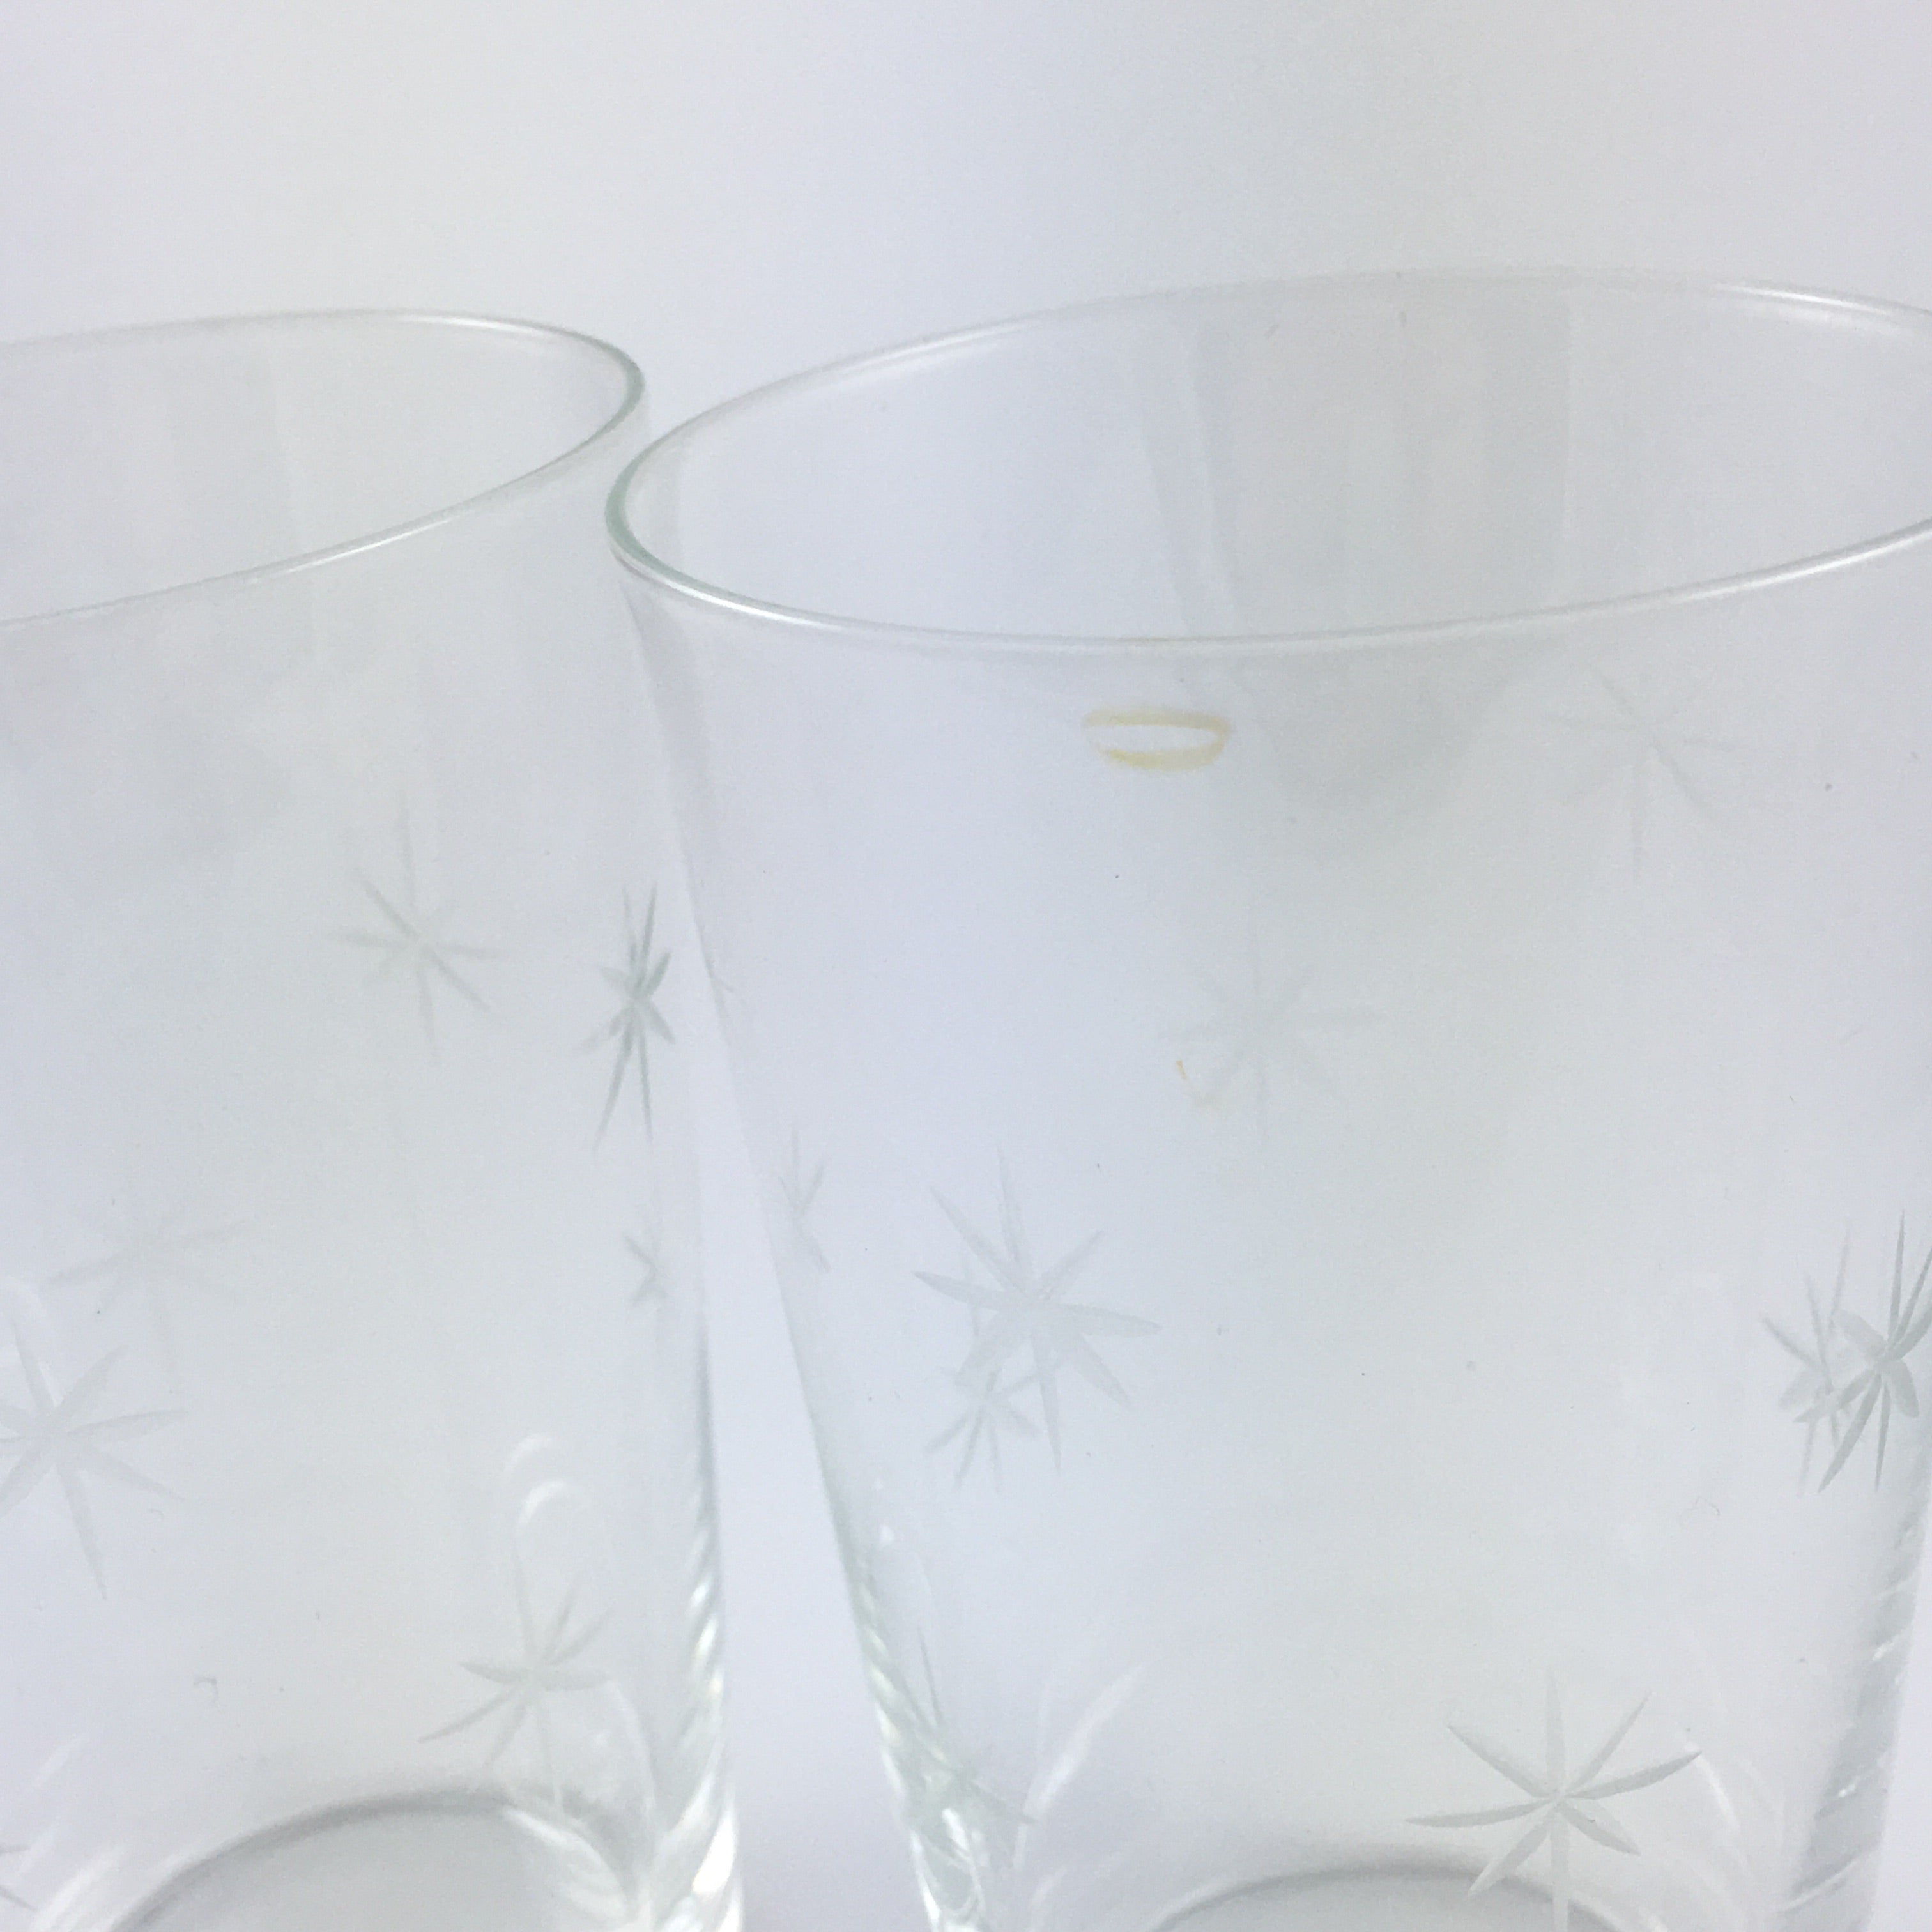 Etched Star Glasses